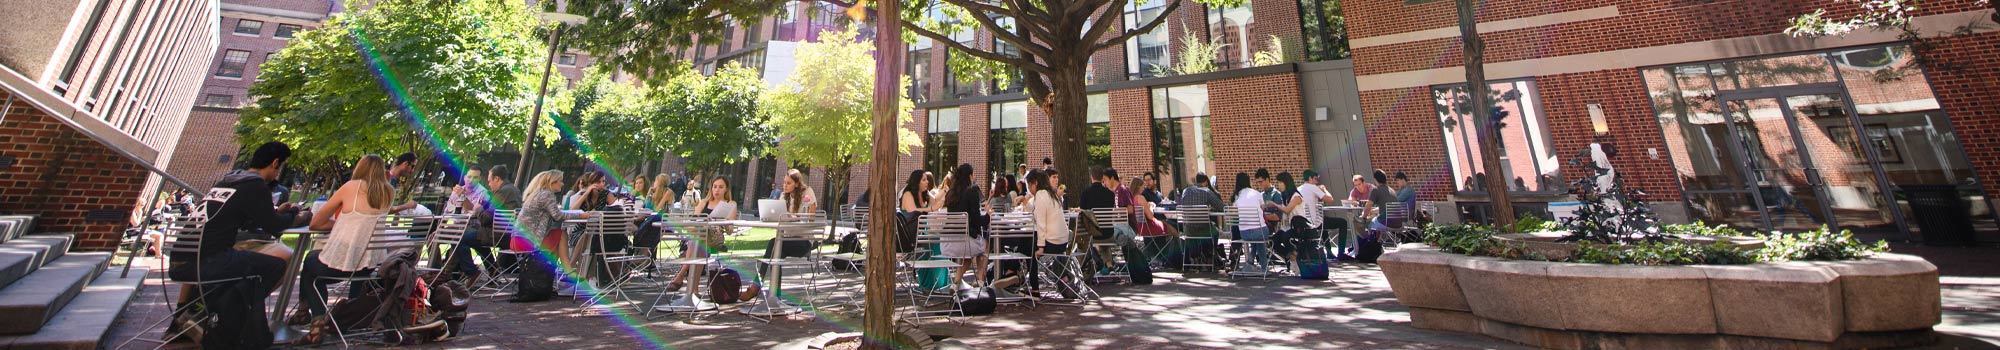 Panoramic view of students studying outdoors